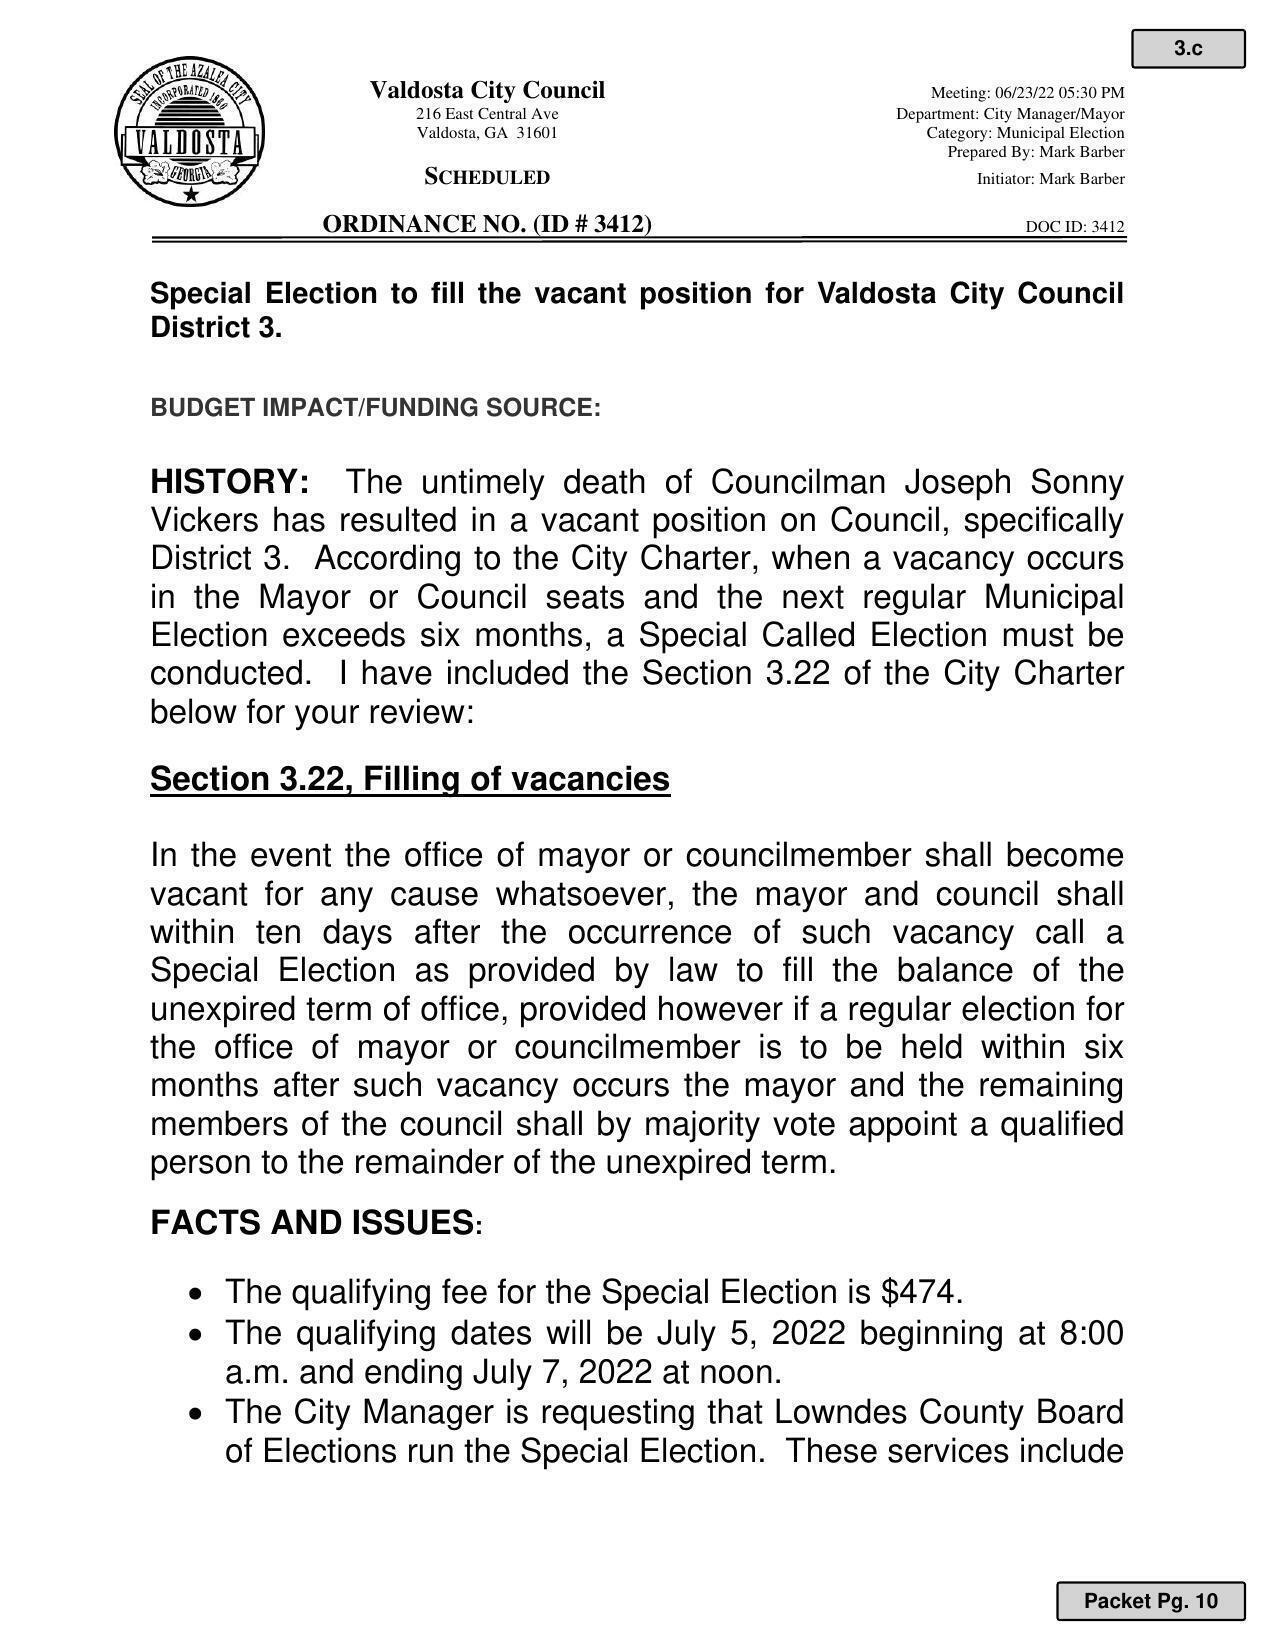 Charter requires Special Election to fill the vacant position for Valdosta City Council District 3.